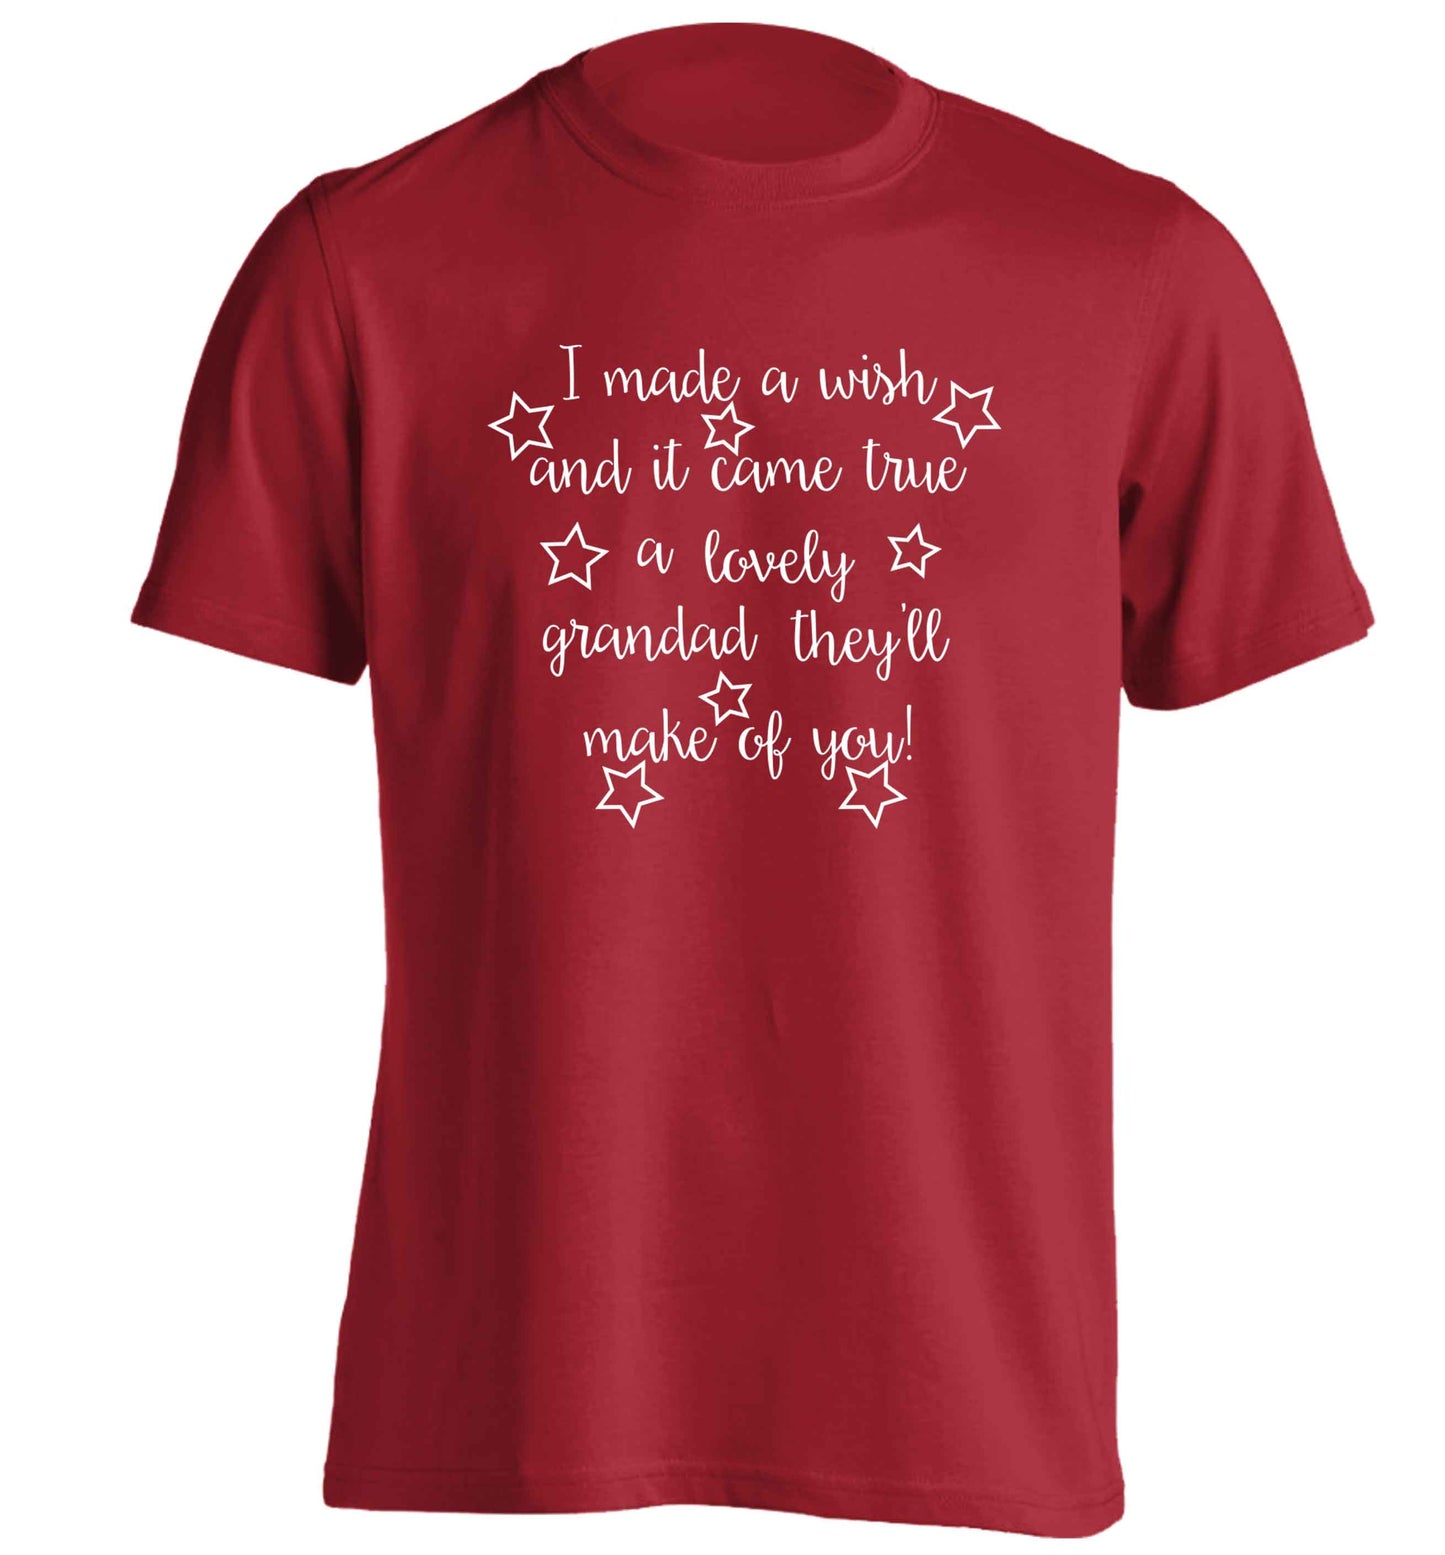 I made a wish and it came true a lovely grandad they'll make of you! adults unisex red Tshirt 2XL